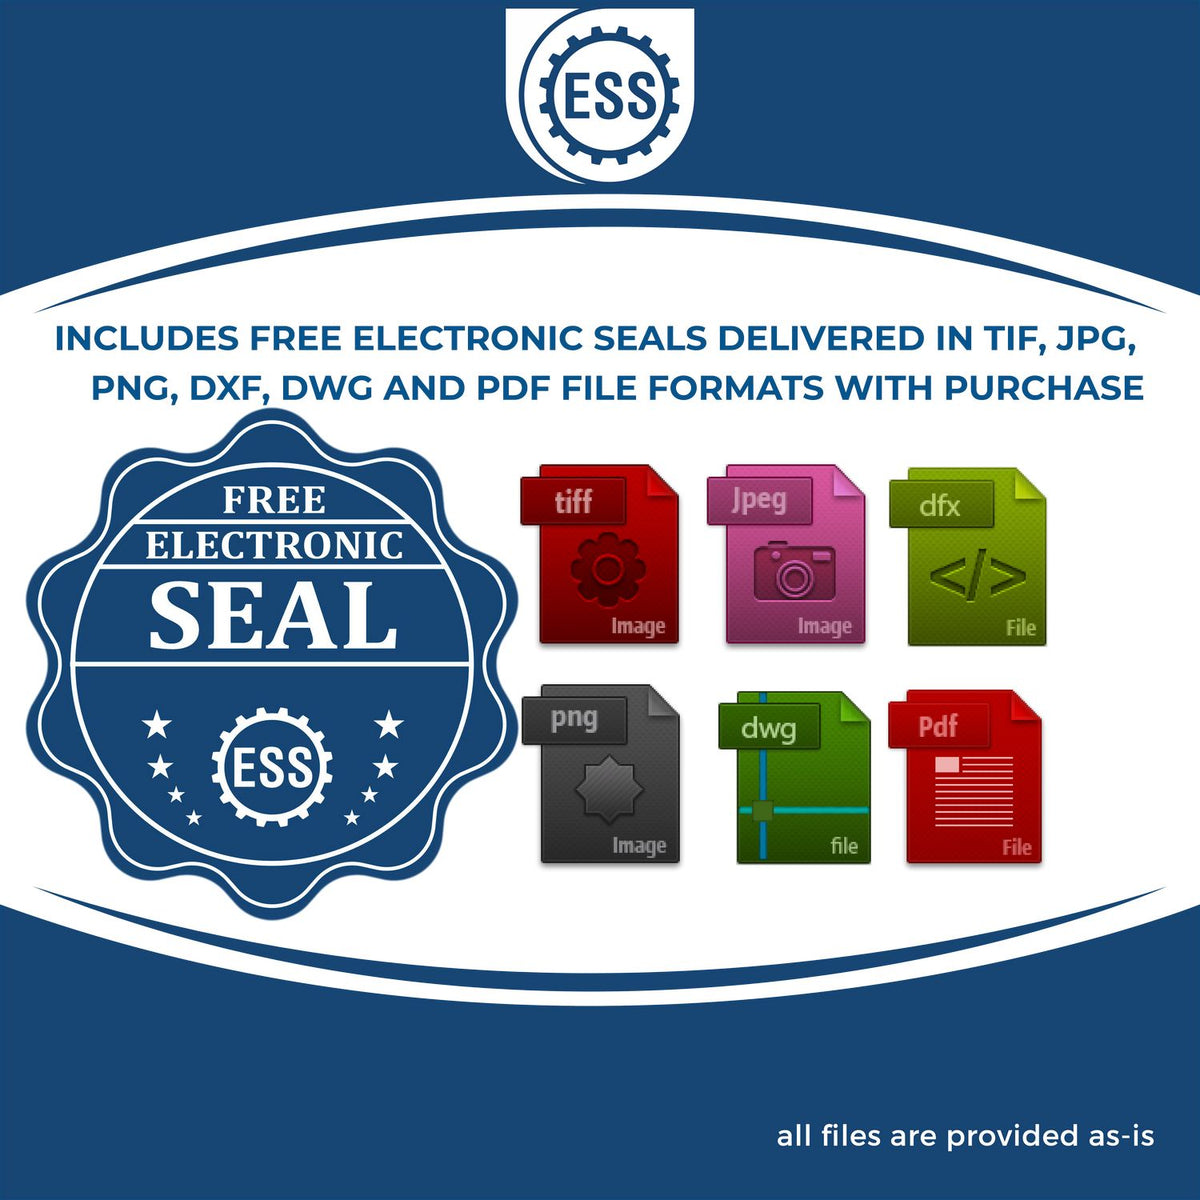 An infographic for the free electronic seal for the MaxLight Premium Pre-Inked Nebraska State Seal Notarial Stamp illustrating the different file type icons such as DXF, DWG, TIF, JPG and PNG.